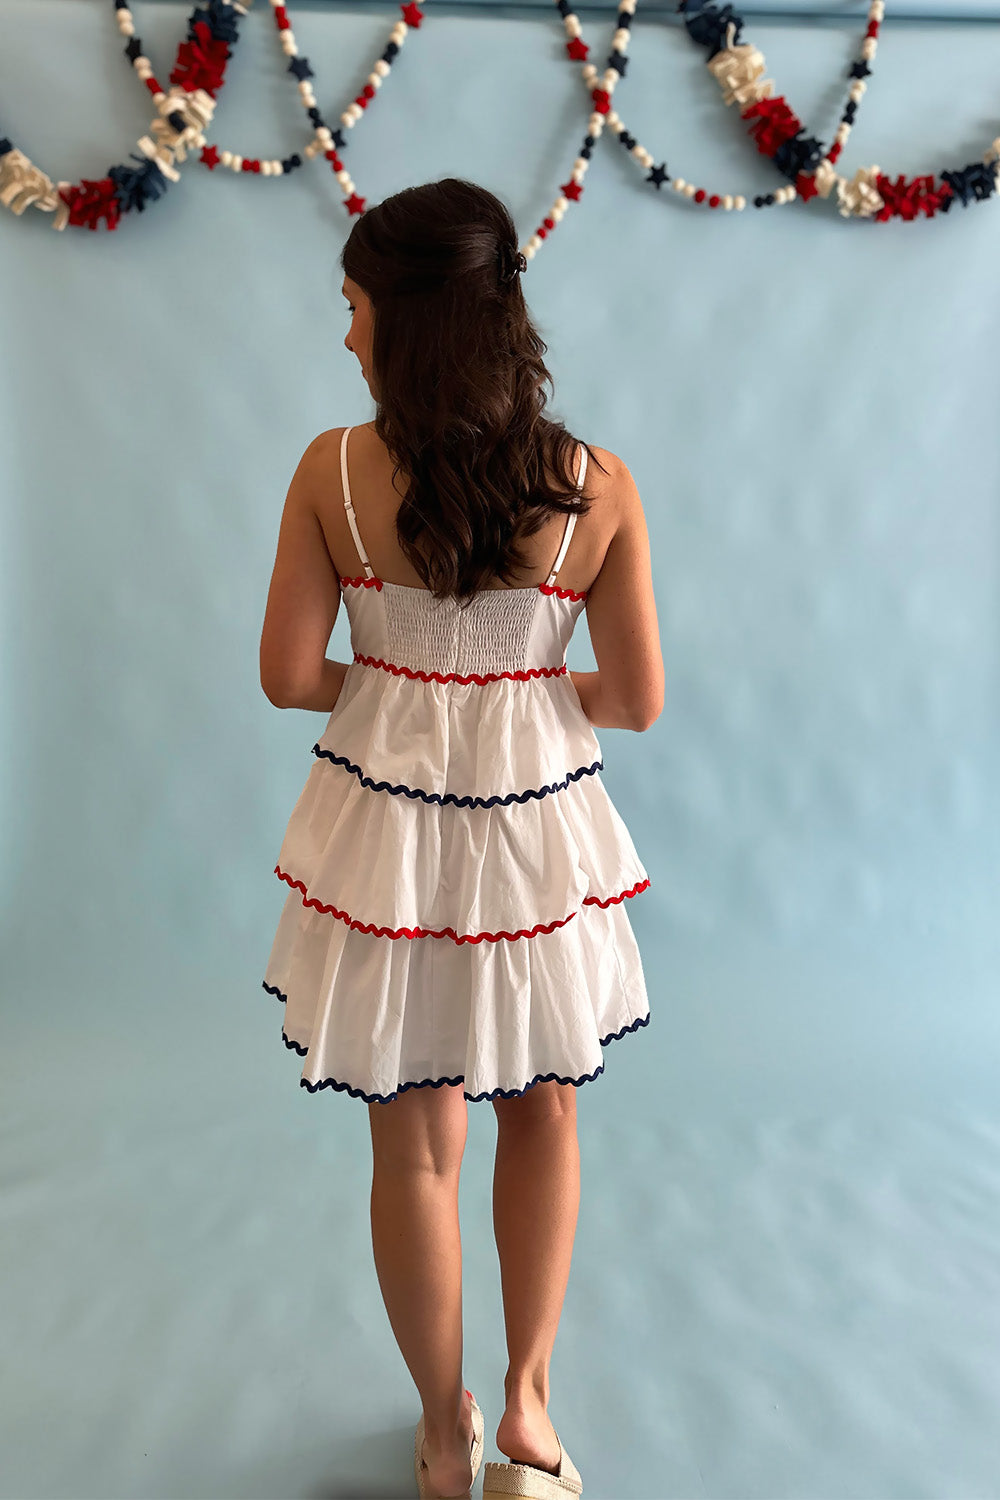 White Dress with Red and Blue Ric Rac